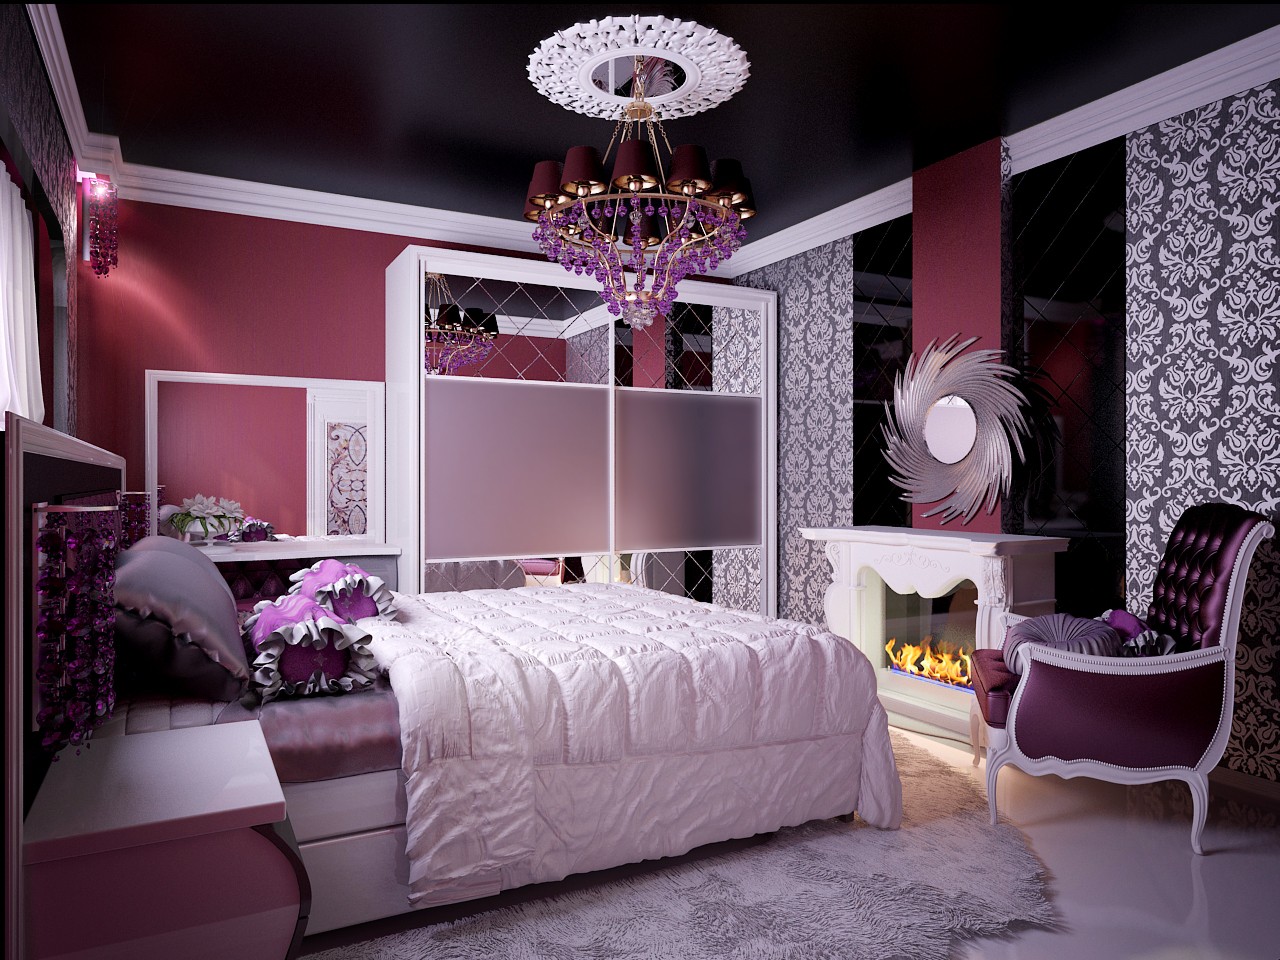 Bedroom Decor For Woman